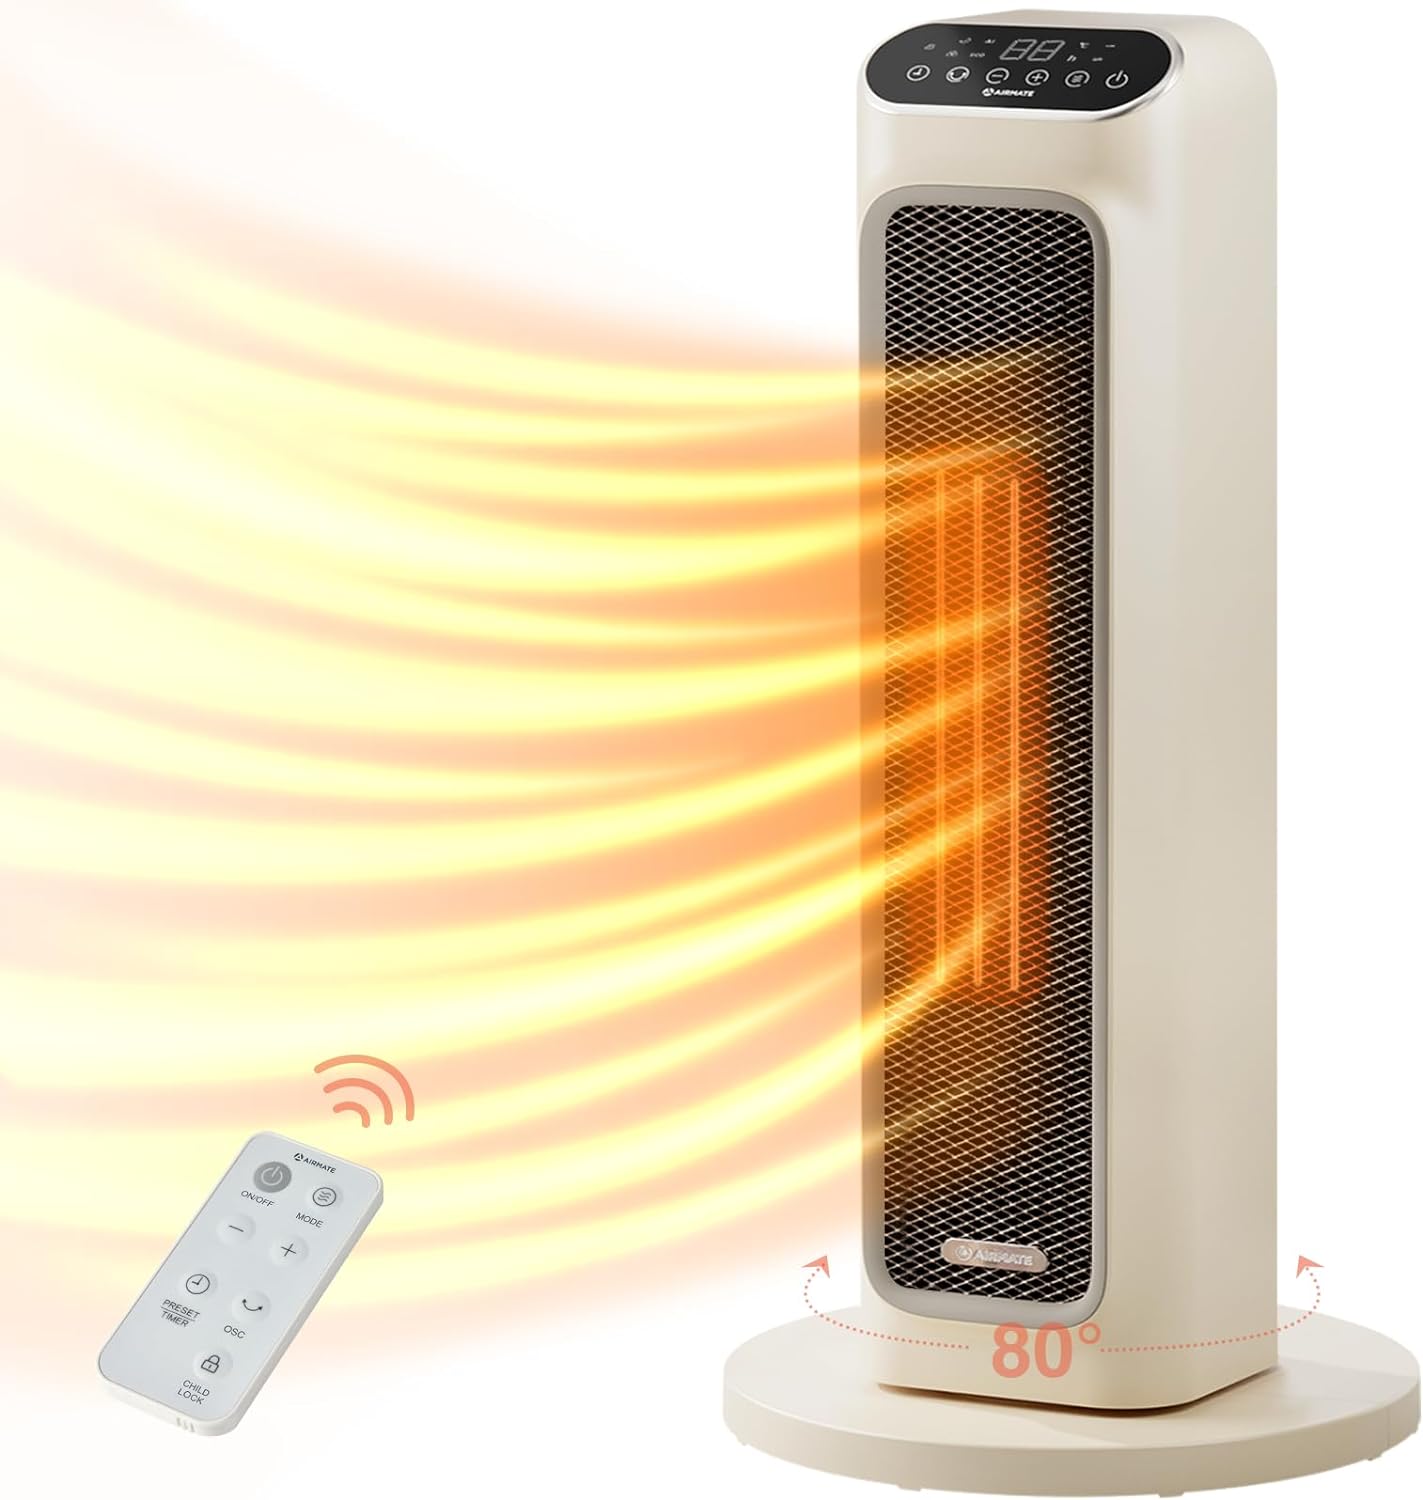 This heater does its job very well for its petite size. I didnt expect it to work so efficiently. Theres an office room in our house that gets so cold like down to the 50s whereas the rest of our house is in the 70s and this tower is able to get that office up to the 70s in like 10 mins! It does get super hot within a foot of the tower though so you need to be careful about melting stuff. The buttons werent very intuitive but I eventually figured it out. Perfect for a cold office space